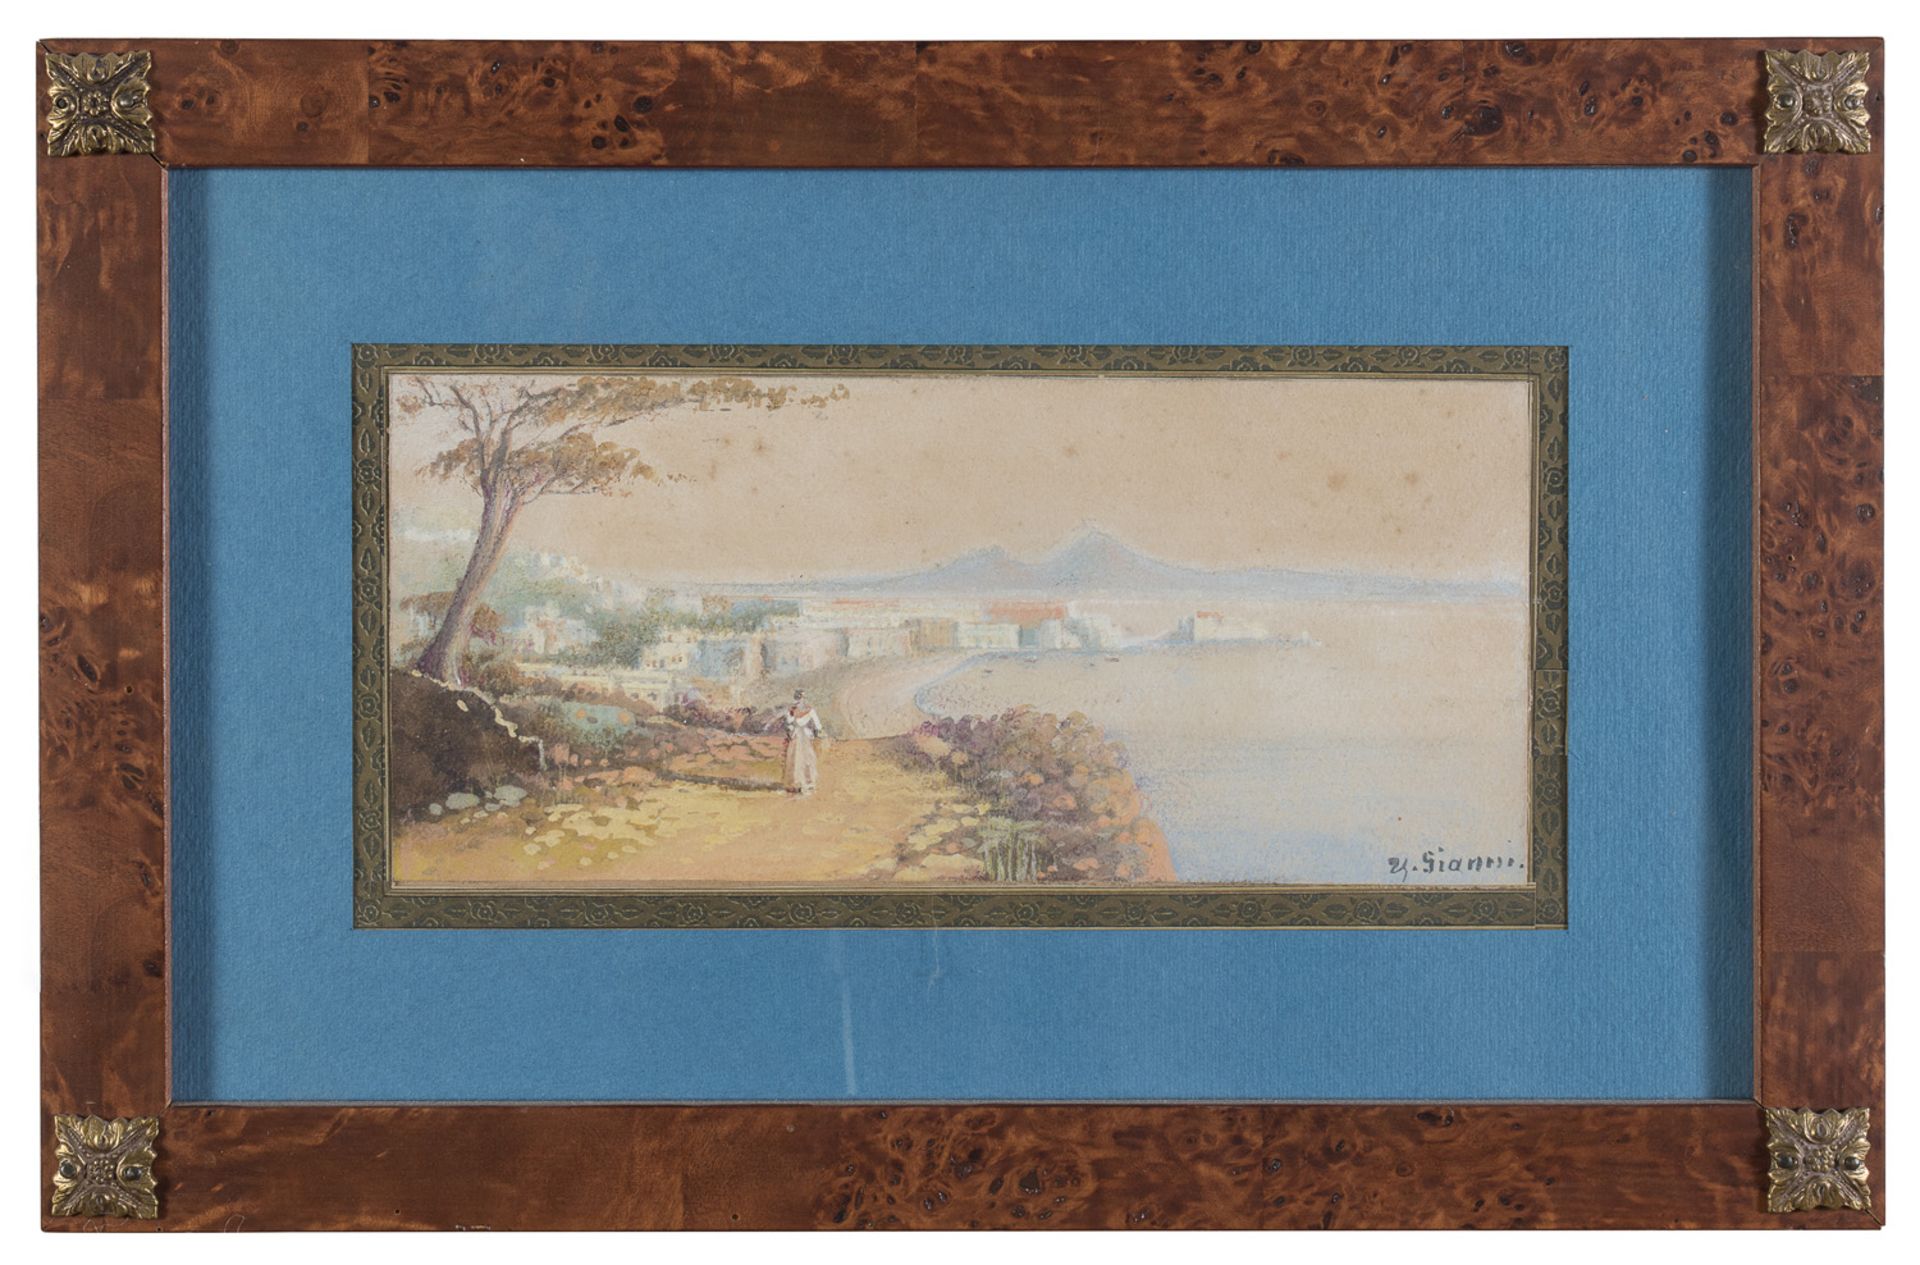 PAIR OF WATERCOLORS OF NAPLES BY YVES GIANNI (19TH-20TH CENTURY)